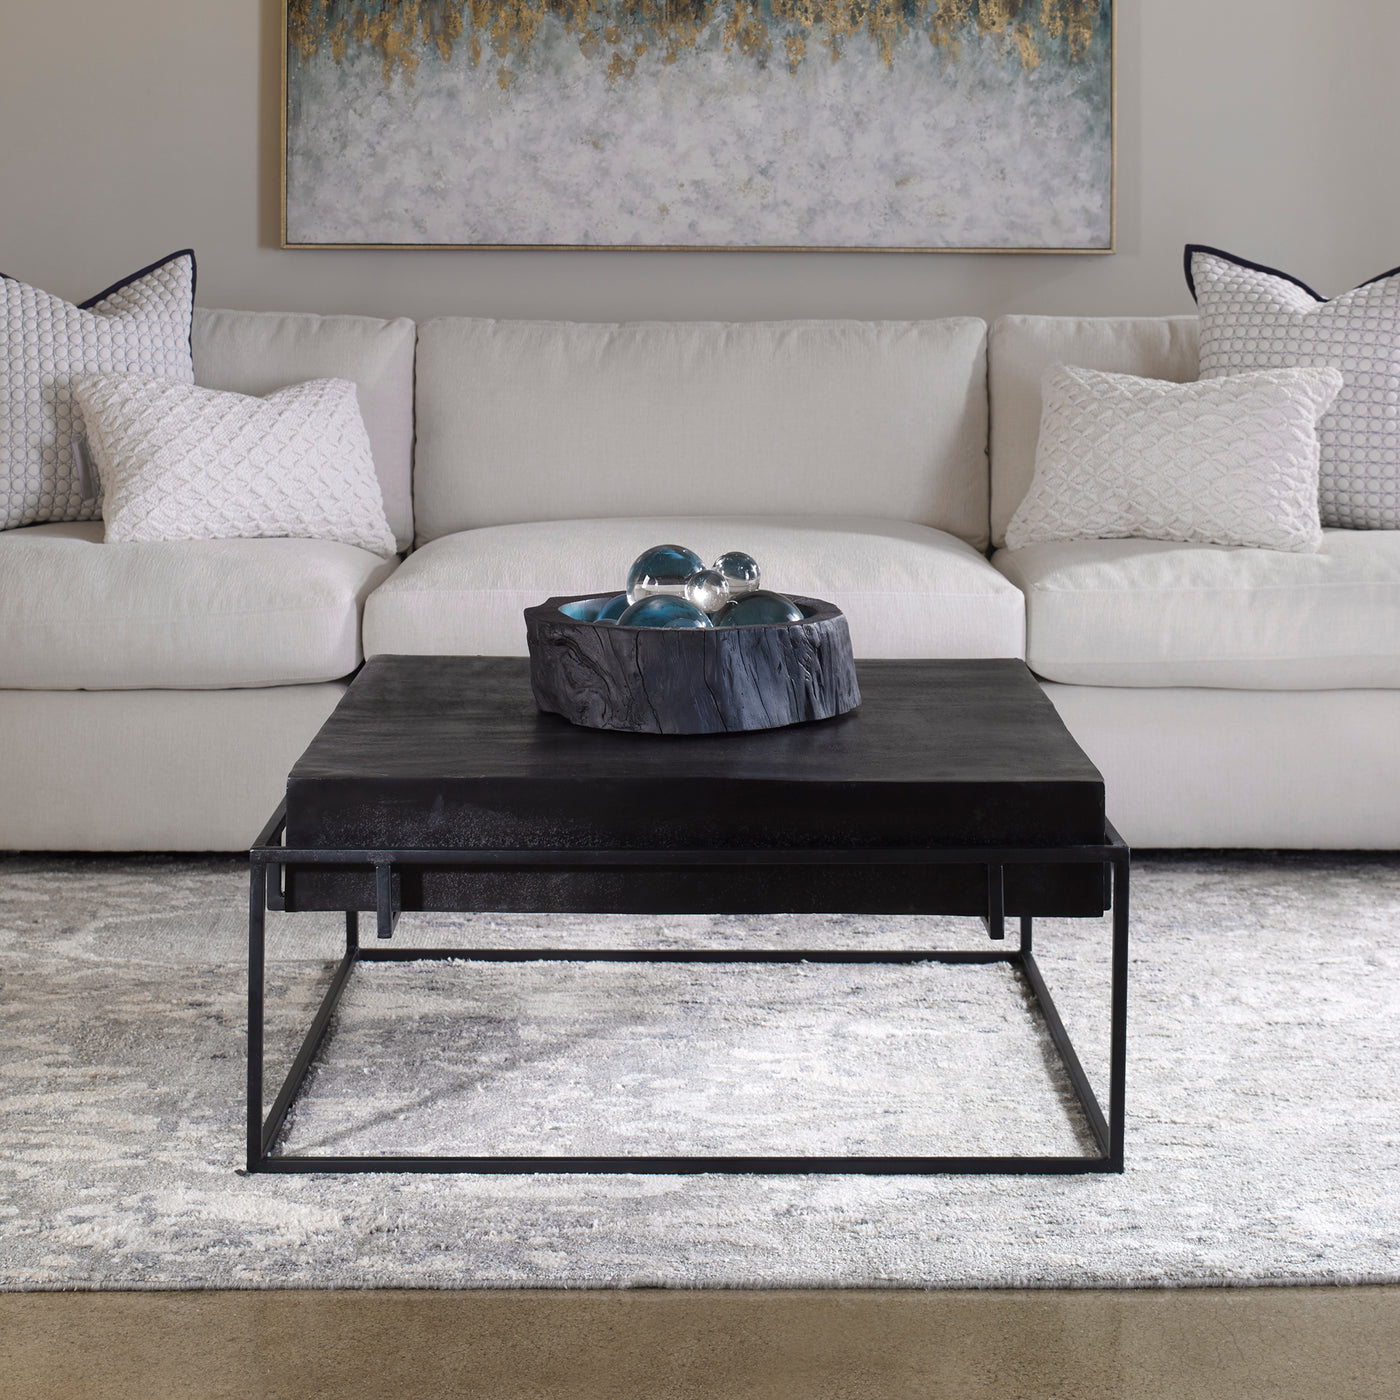 With Modern Minimalist Styling, This Coffee Table Features A Thick Cast Aluminum Top With Natural Texturing Finished In A ...